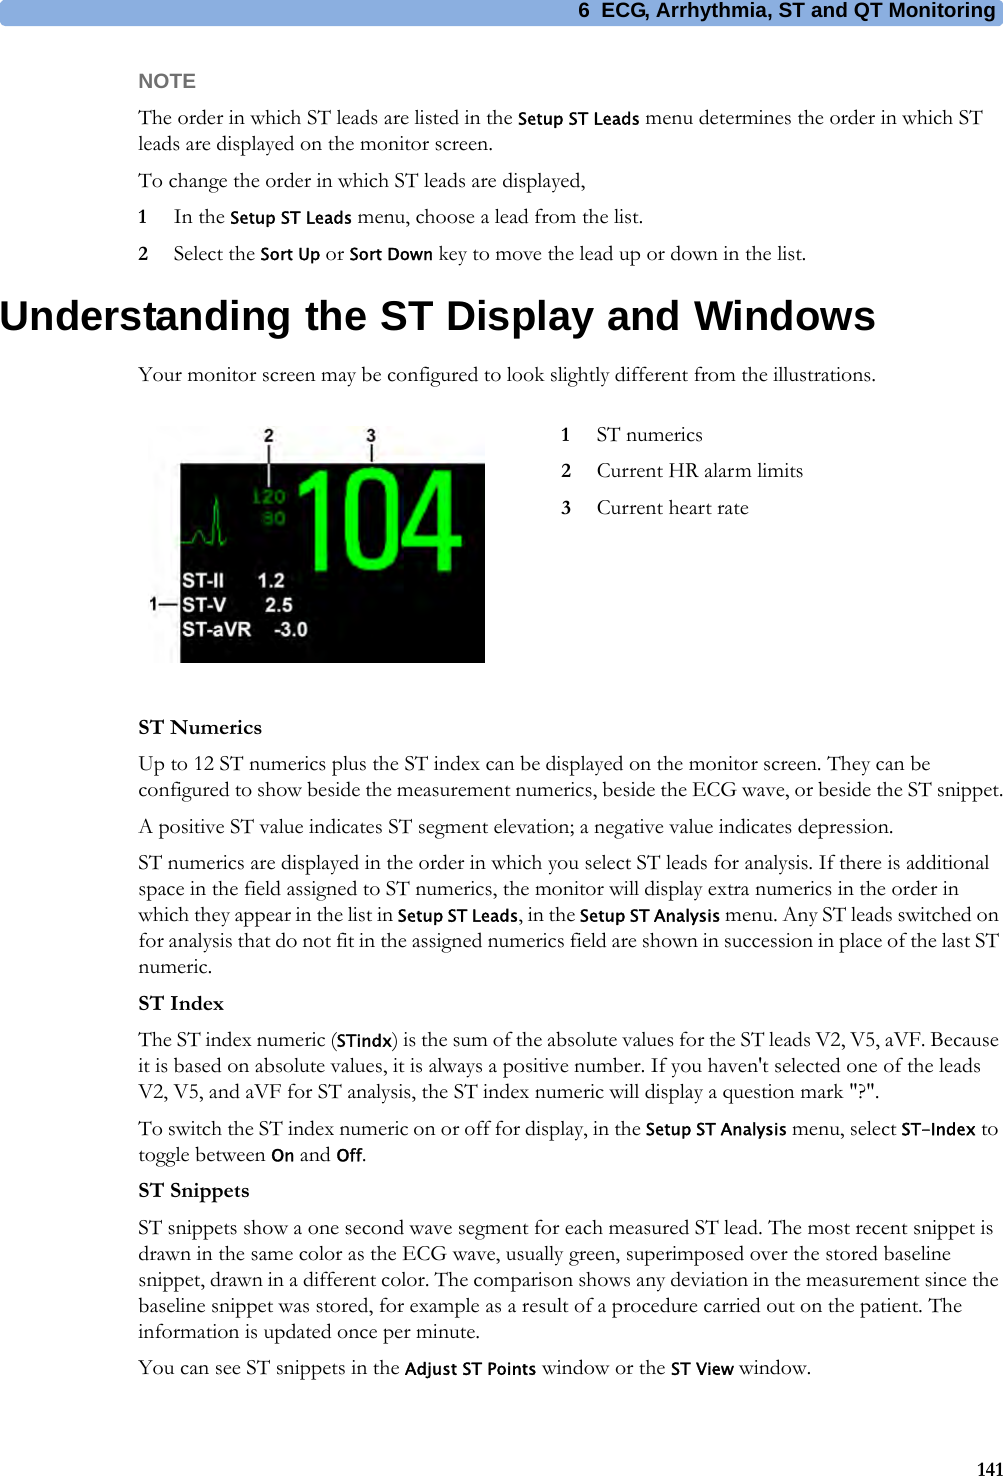 6 ECG, Arrhythmia, ST and QT Monitoring141NOTEThe order in which ST leads are listed in the Setup ST Leads menu determines the order in which ST leads are displayed on the monitor screen.To change the order in which ST leads are displayed,1In the Setup ST Leads menu, choose a lead from the list.2Select the Sort Up or Sort Down key to move the lead up or down in the list.Understanding the ST Display and WindowsYour monitor screen may be configured to look slightly different from the illustrations.ST NumericsUp to 12 ST numerics plus the ST index can be displayed on the monitor screen. They can be configured to show beside the measurement numerics, beside the ECG wave, or beside the ST snippet.A positive ST value indicates ST segment elevation; a negative value indicates depression.ST numerics are displayed in the order in which you select ST leads for analysis. If there is additional space in the field assigned to ST numerics, the monitor will display extra numerics in the order in which they appear in the list in Setup ST Leads, in the Setup ST Analysis menu. Any ST leads switched on for analysis that do not fit in the assigned numerics field are shown in succession in place of the last ST numeric.ST IndexThe ST index numeric (STindx) is the sum of the absolute values for the ST leads V2, V5, aVF. Because it is based on absolute values, it is always a positive number. If you haven&apos;t selected one of the leads V2, V5, and aVF for ST analysis, the ST index numeric will display a question mark &quot;?&quot;.To switch the ST index numeric on or off for display, in the Setup ST Analysis menu, select ST-Index to toggle between On and Off.ST SnippetsST snippets show a one second wave segment for each measured ST lead. The most recent snippet is drawn in the same color as the ECG wave, usually green, superimposed over the stored baseline snippet, drawn in a different color. The comparison shows any deviation in the measurement since the baseline snippet was stored, for example as a result of a procedure carried out on the patient. The information is updated once per minute.You can see ST snippets in the Adjust ST Points window or the ST View window.1ST numerics2Current HR alarm limits3Current heart rate